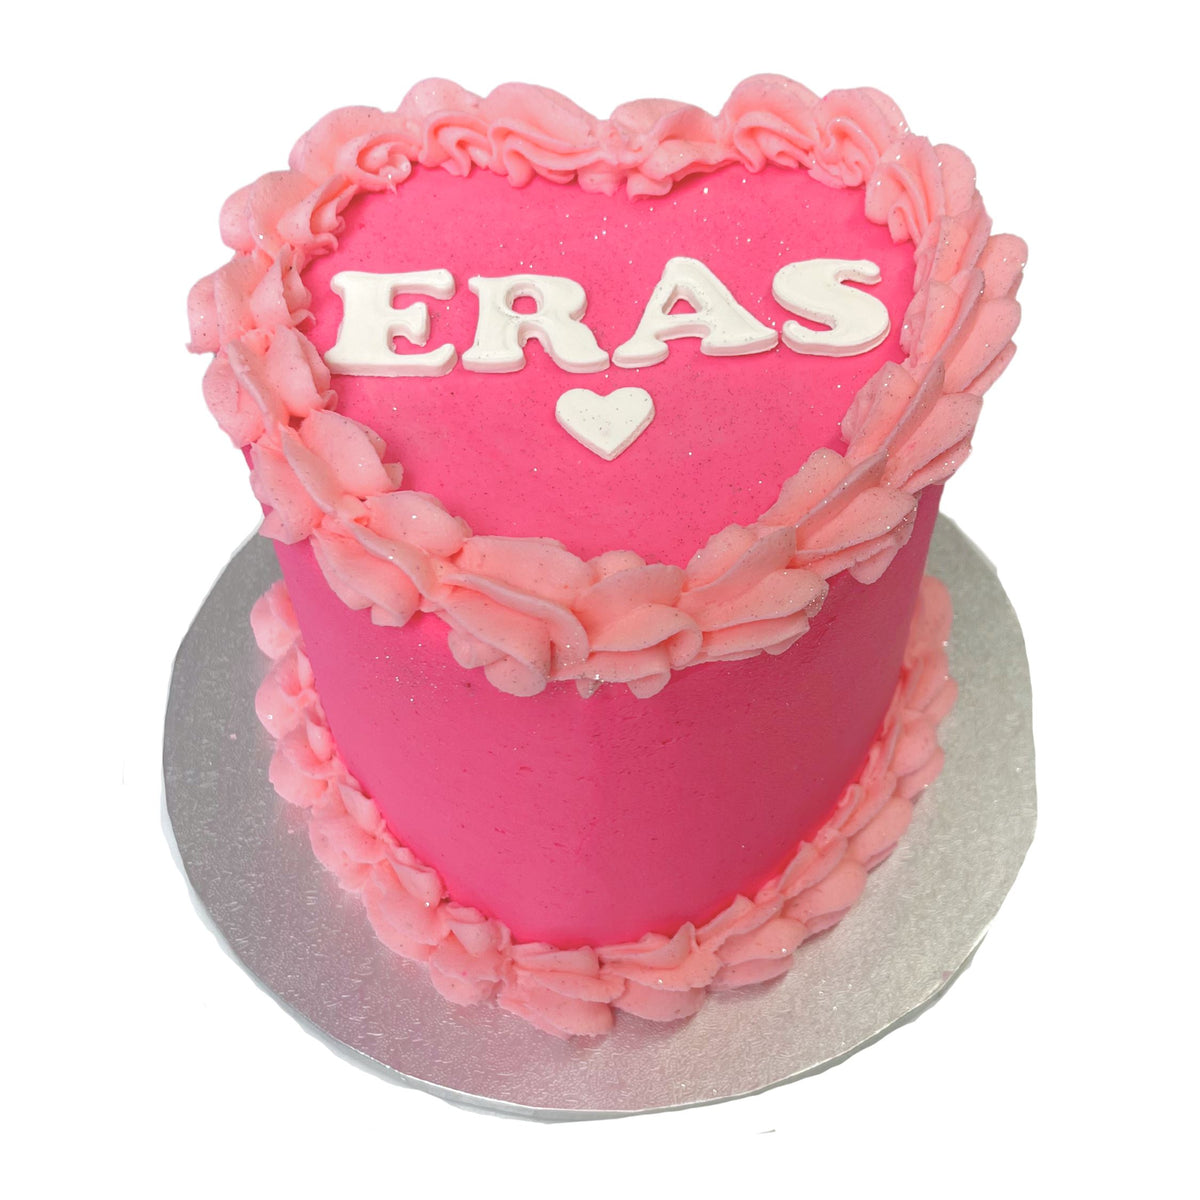 Vintage Heart Cake - Hot Pink The Cupcake Queens 